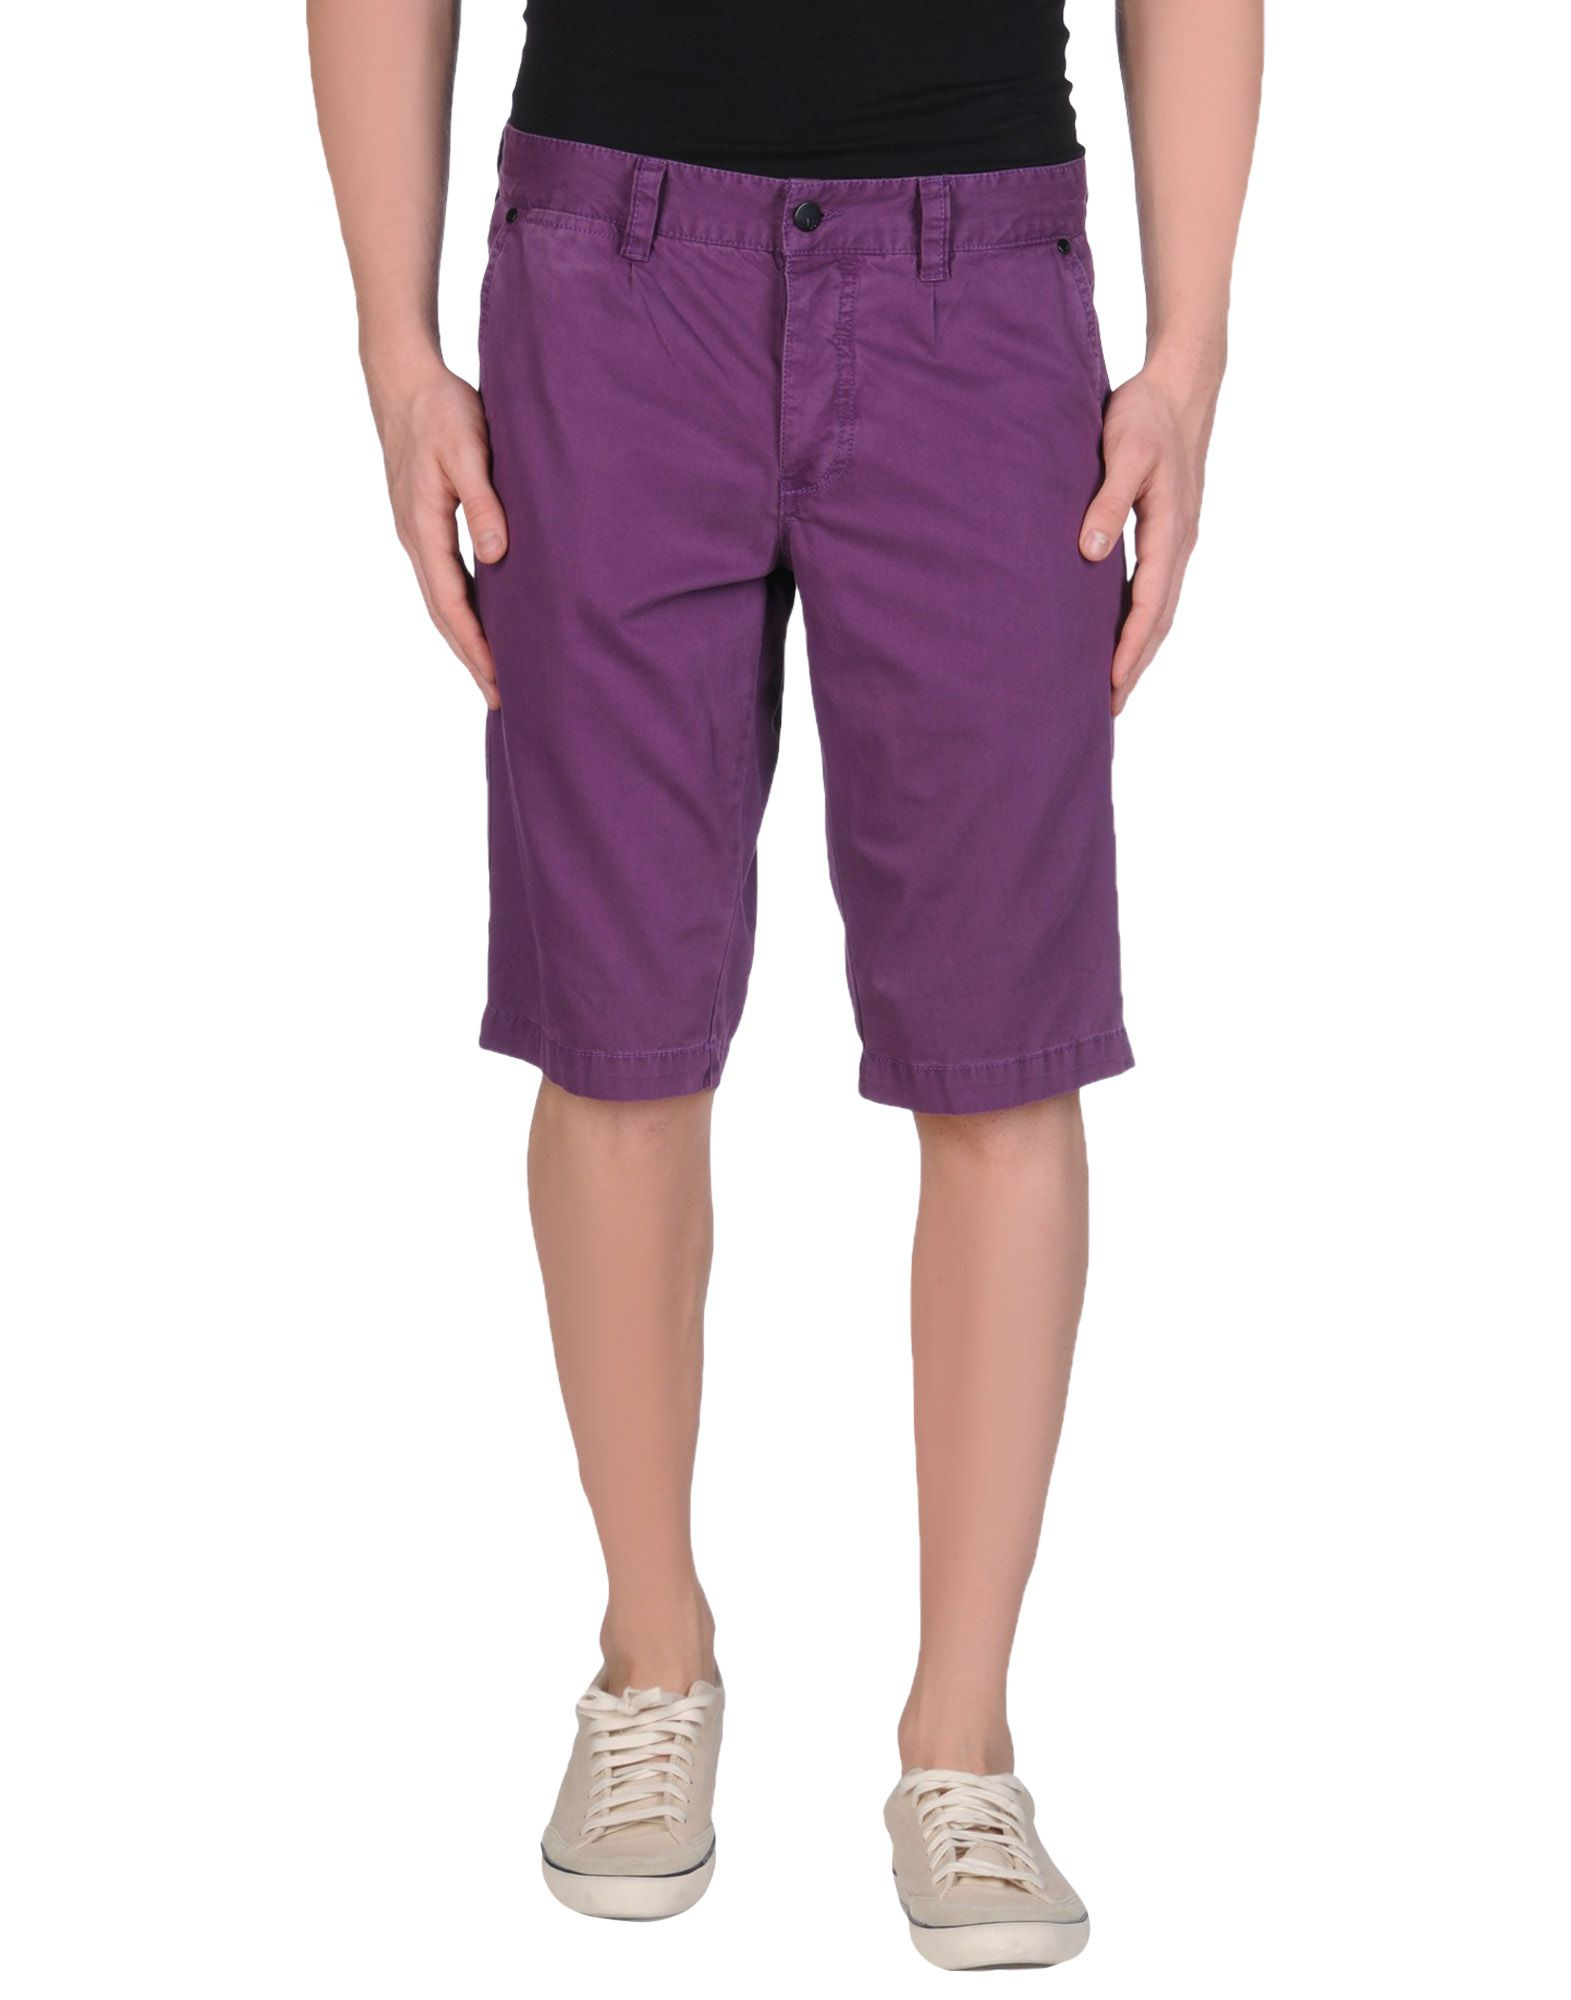 What To Wear With Lilac Shorts For Men